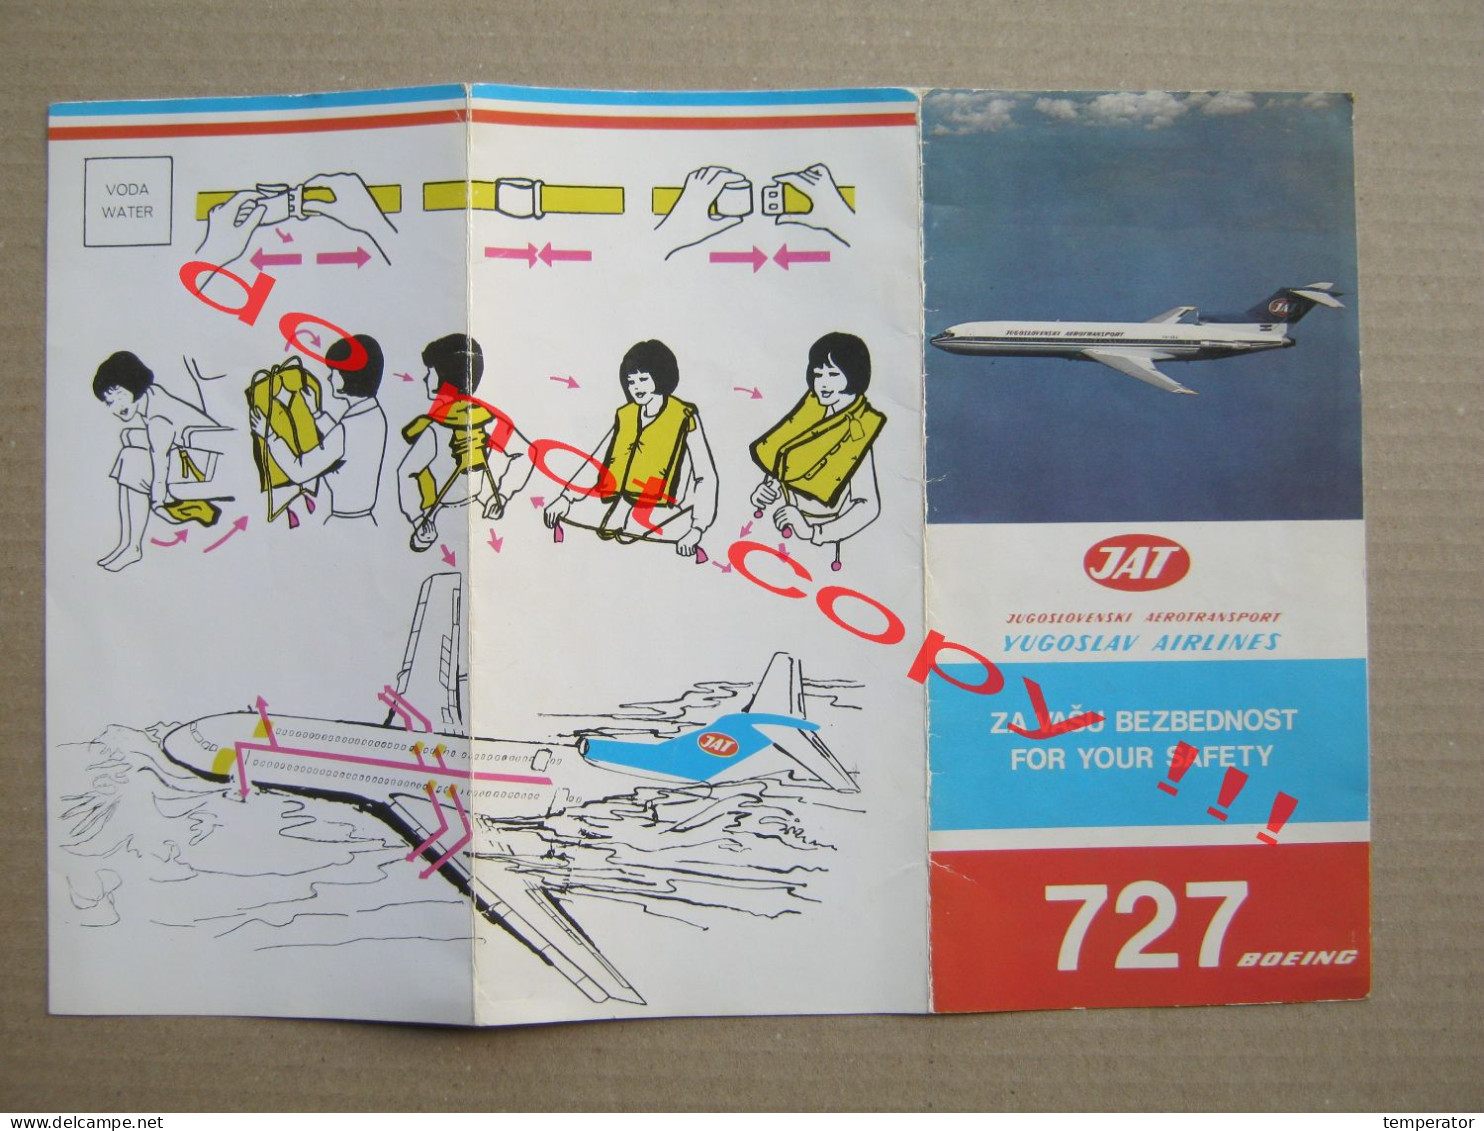 JAT YUGOSLAV AIRLINES - 727 BOEING ( FOR YOUR SAFETY ... ) - Advertenties